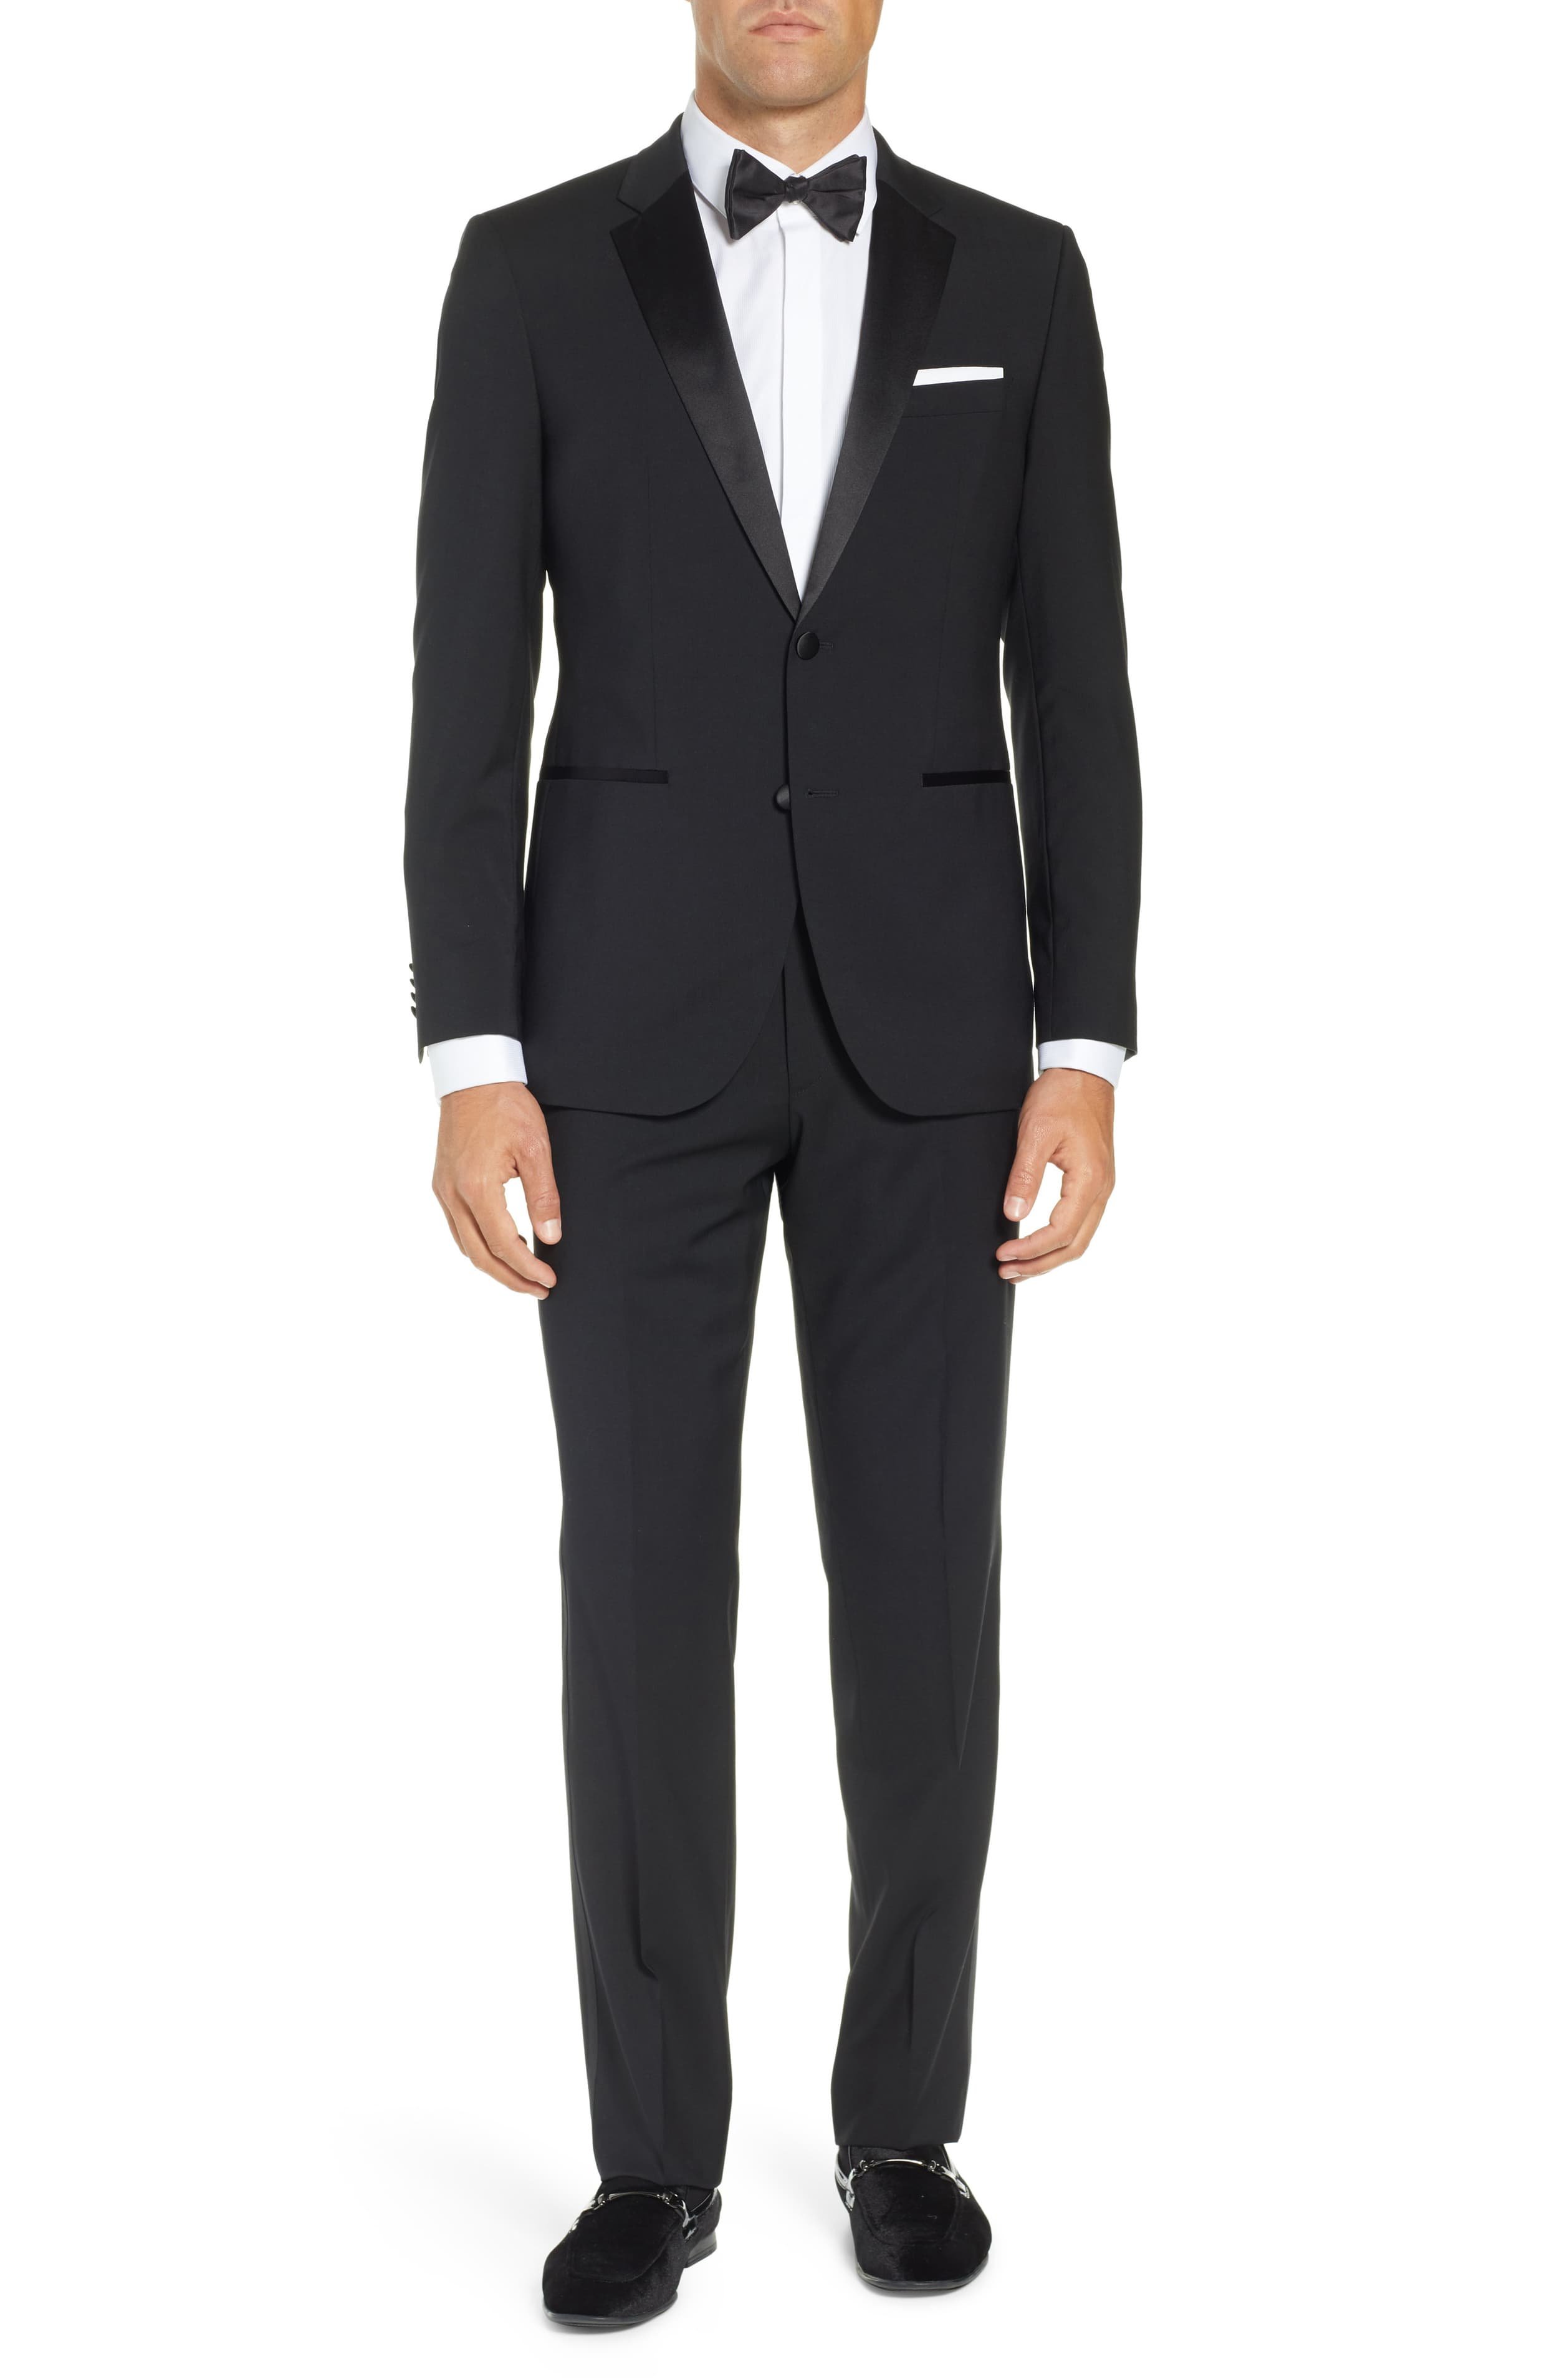 Adam Baker Men's Classic & Slim Fit Two-Piece Formal Tuxedo Suit Available in Many Sizes & Colors 